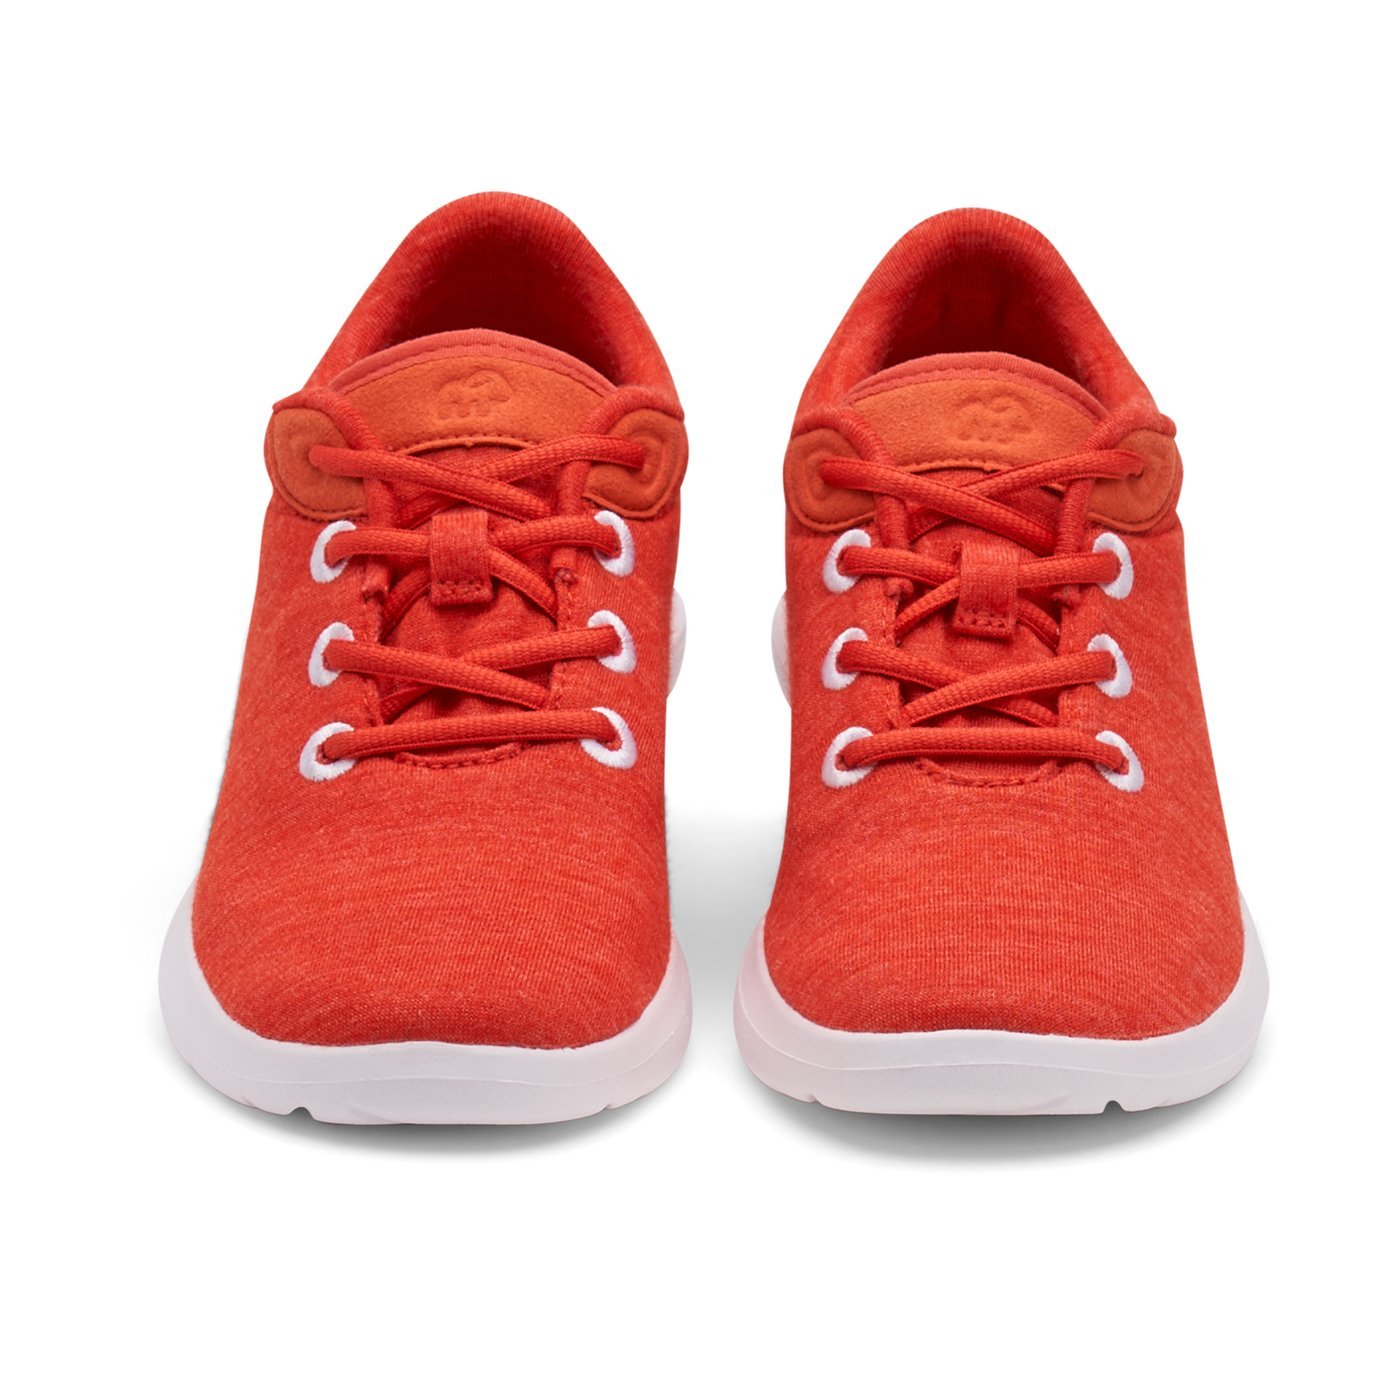 Women's Lace-Ups Coral - Special Offer